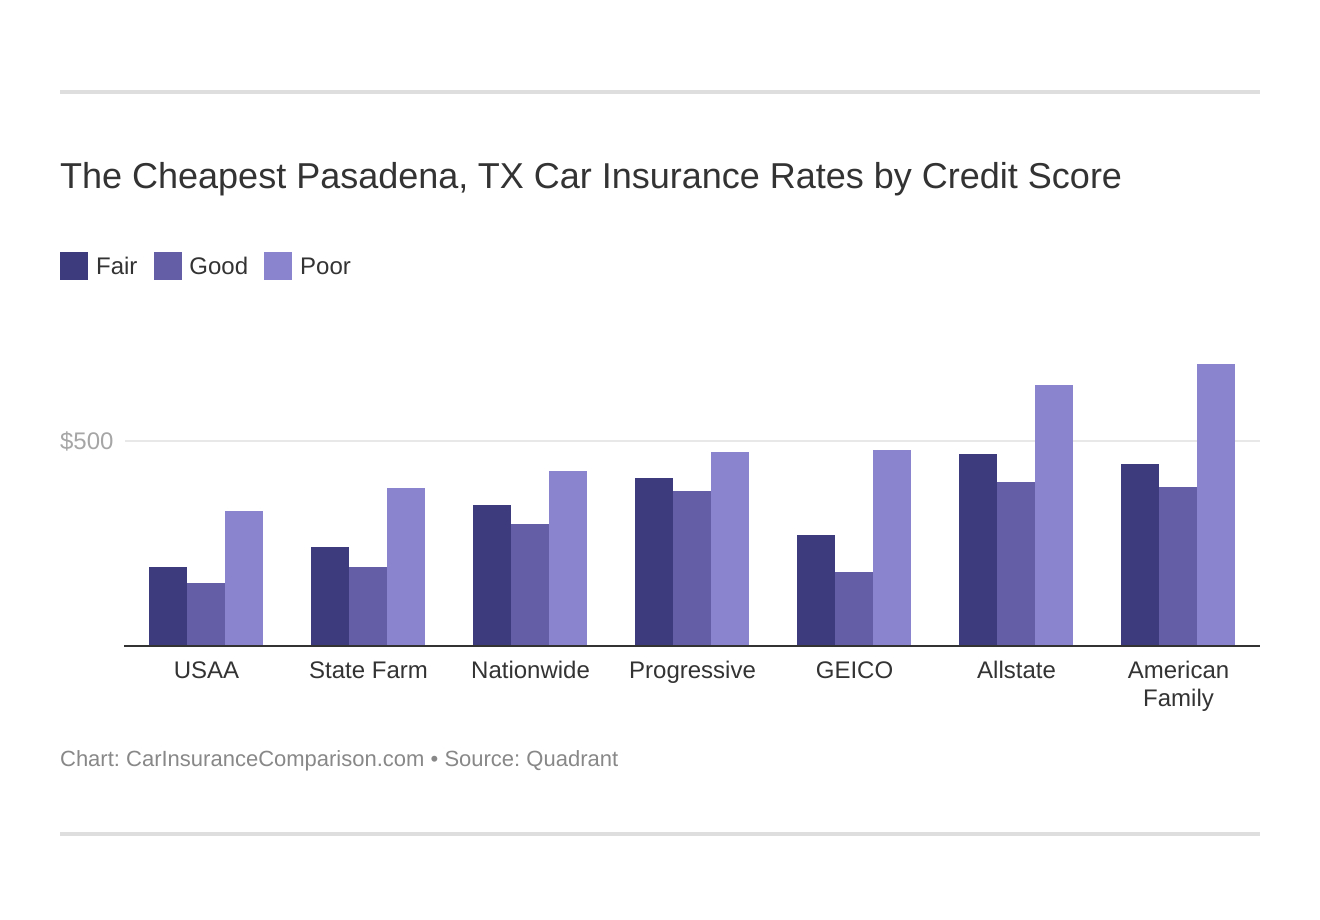 The Cheapest Pasadena, TX Car Insurance Rates by Credit Score